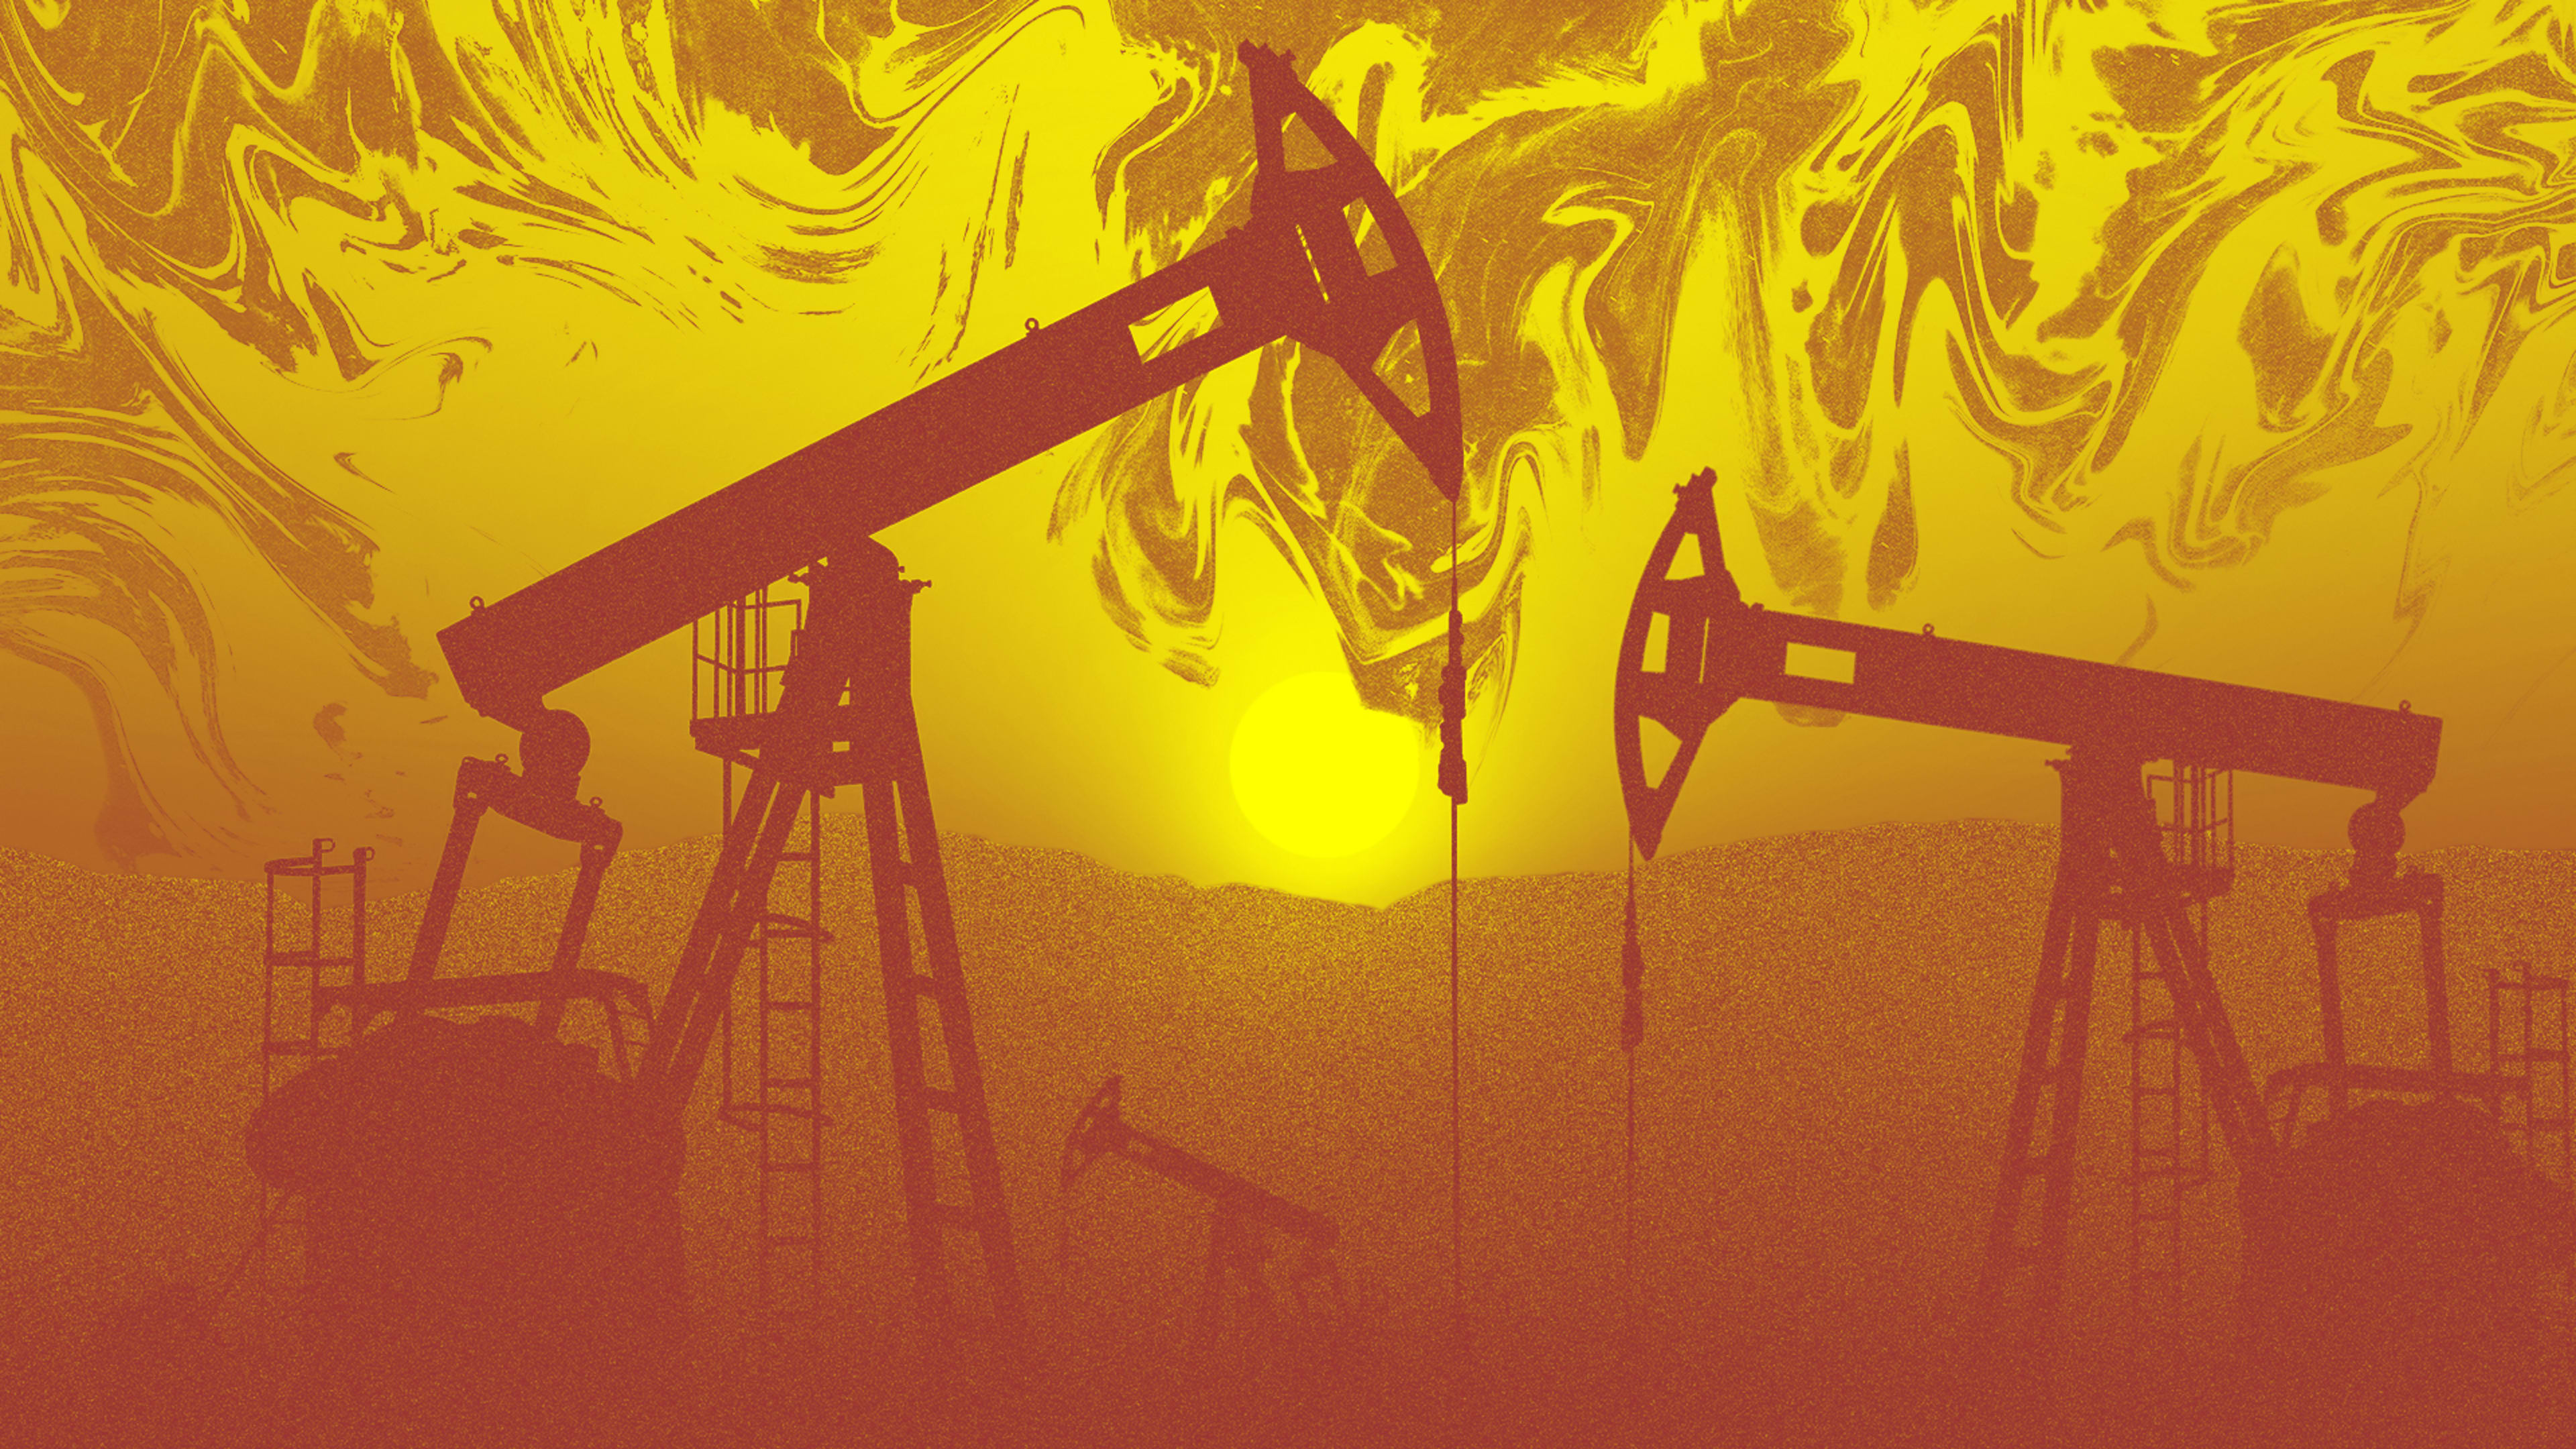 Only 2 of 52 top oil and gas companies have science-based climate targets